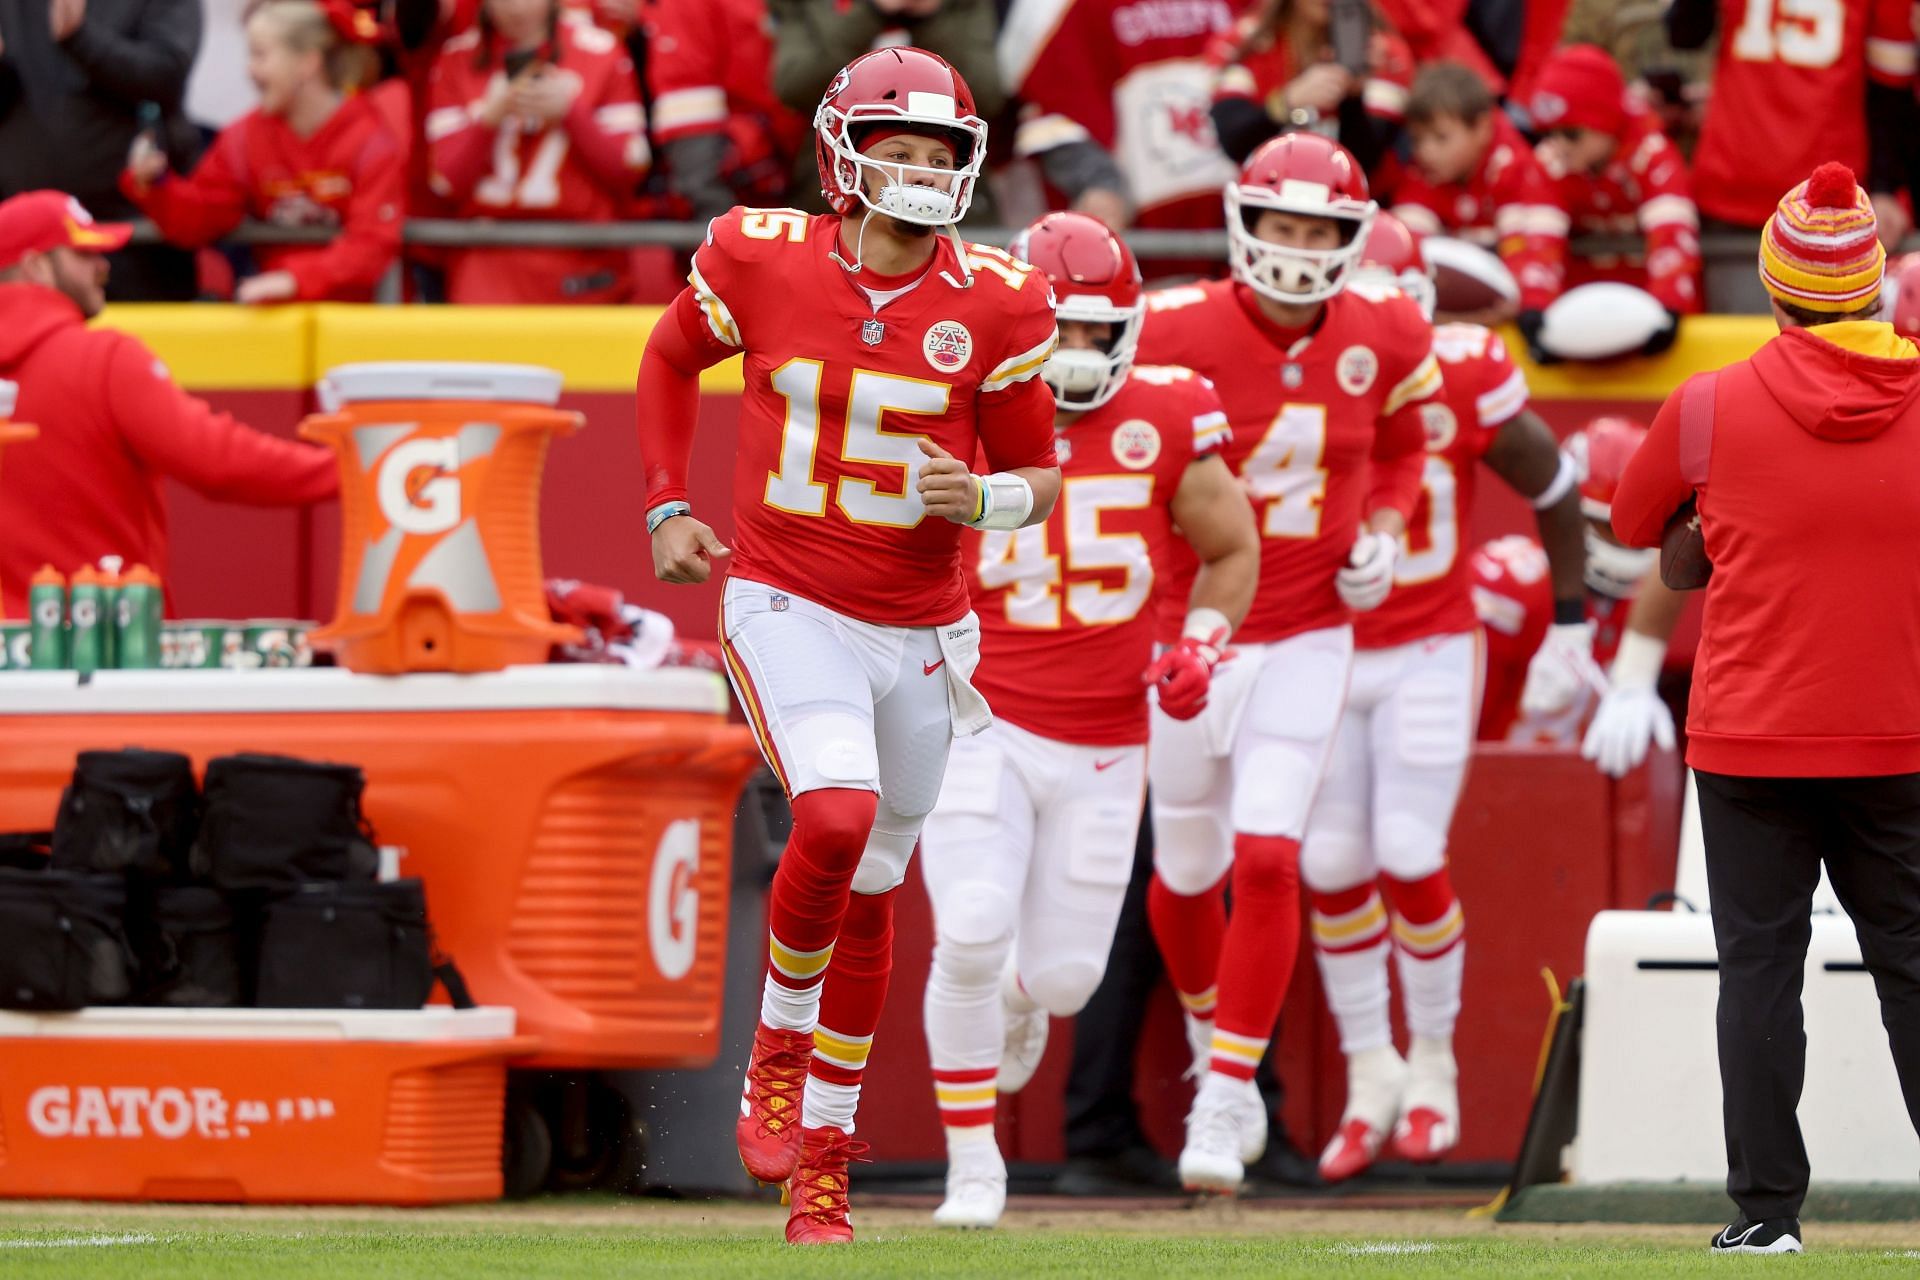 The Kansas City Chiefs remain the number one seed in the AFC